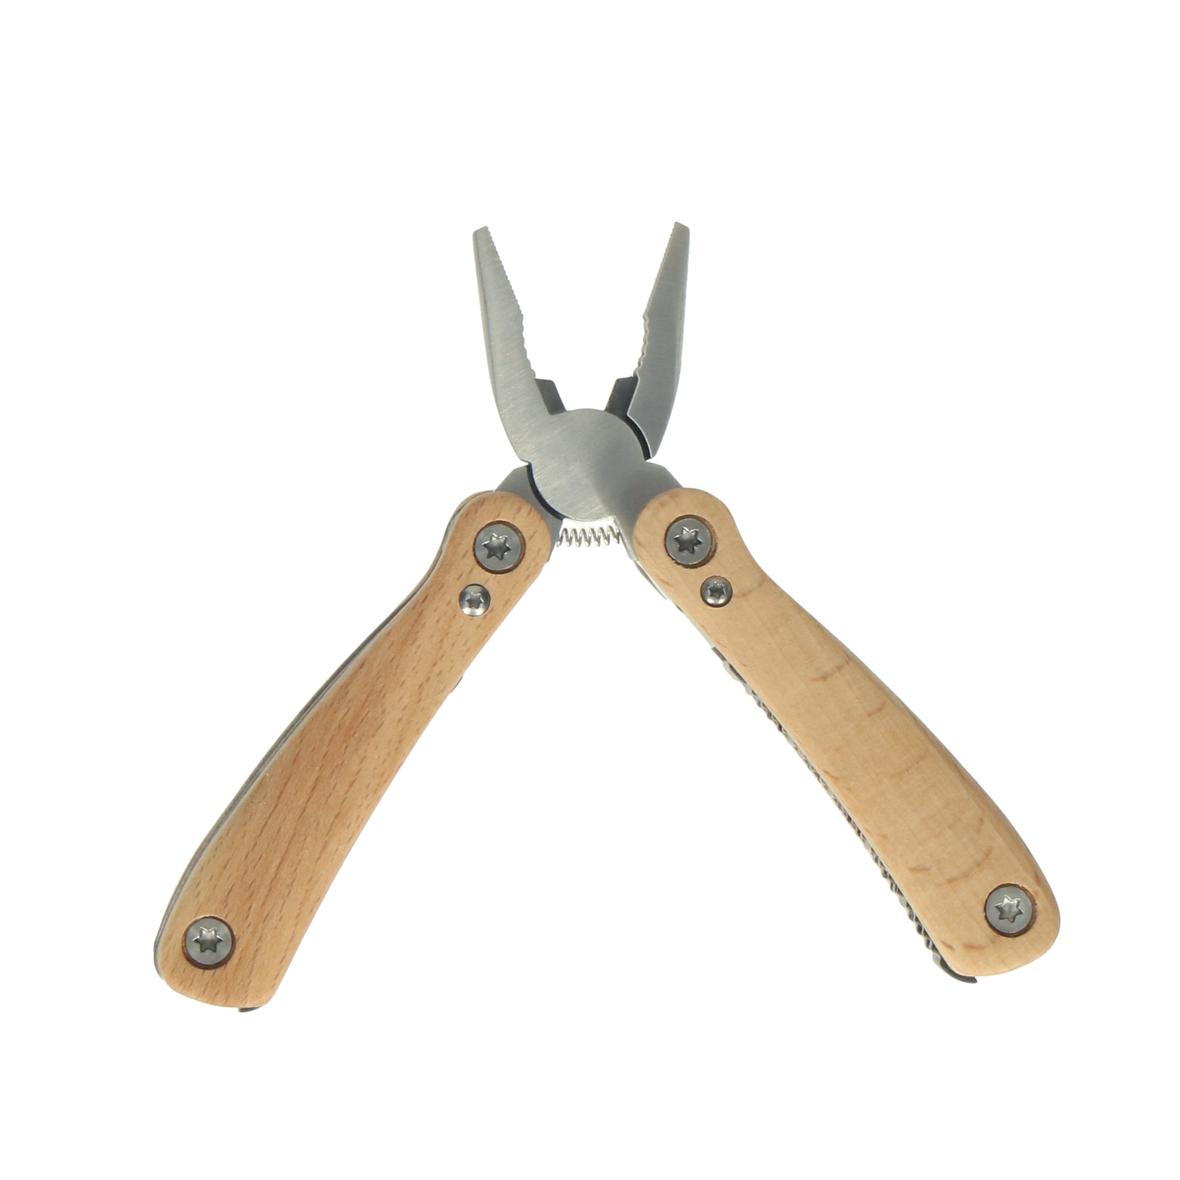 A penknife made of stainless steel that serves multiple functions. - Wigston Magna